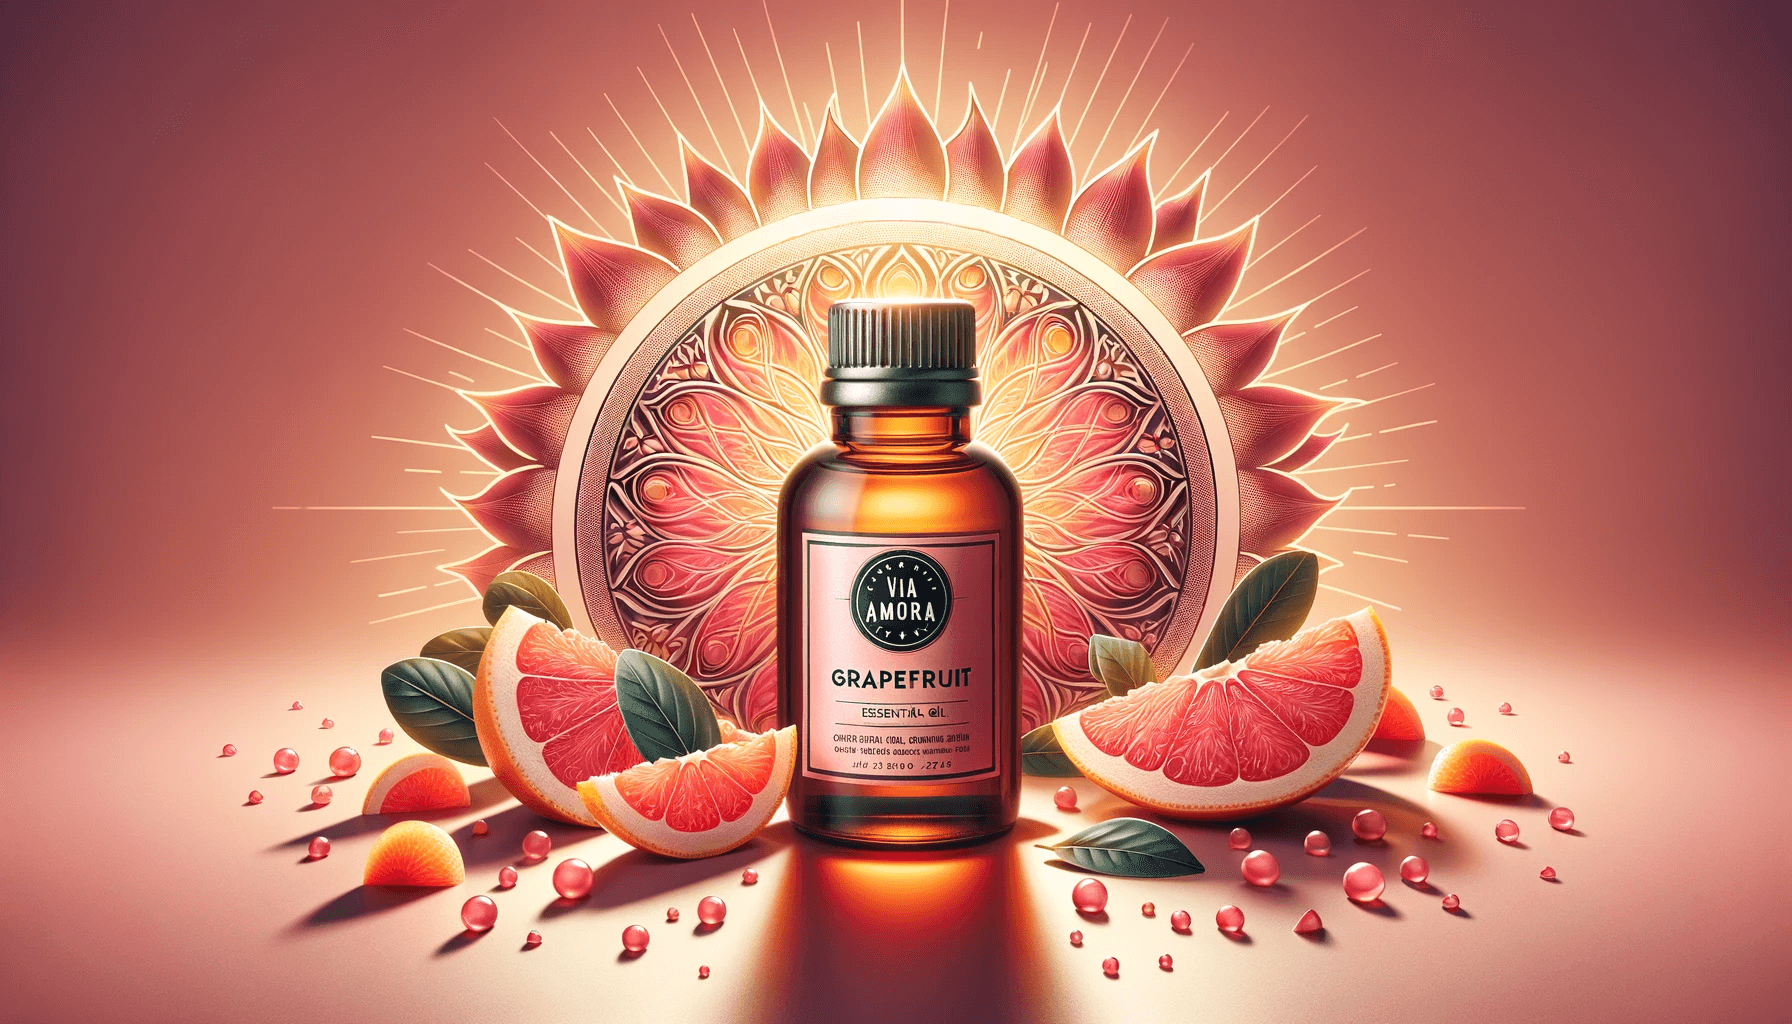 DALL·E 2024 01 23 15.04.38 Create a vibrant and energizing composition featuring a bottle of Via Aroma grapefruit essential oil in the foreground with the design of the sun shi